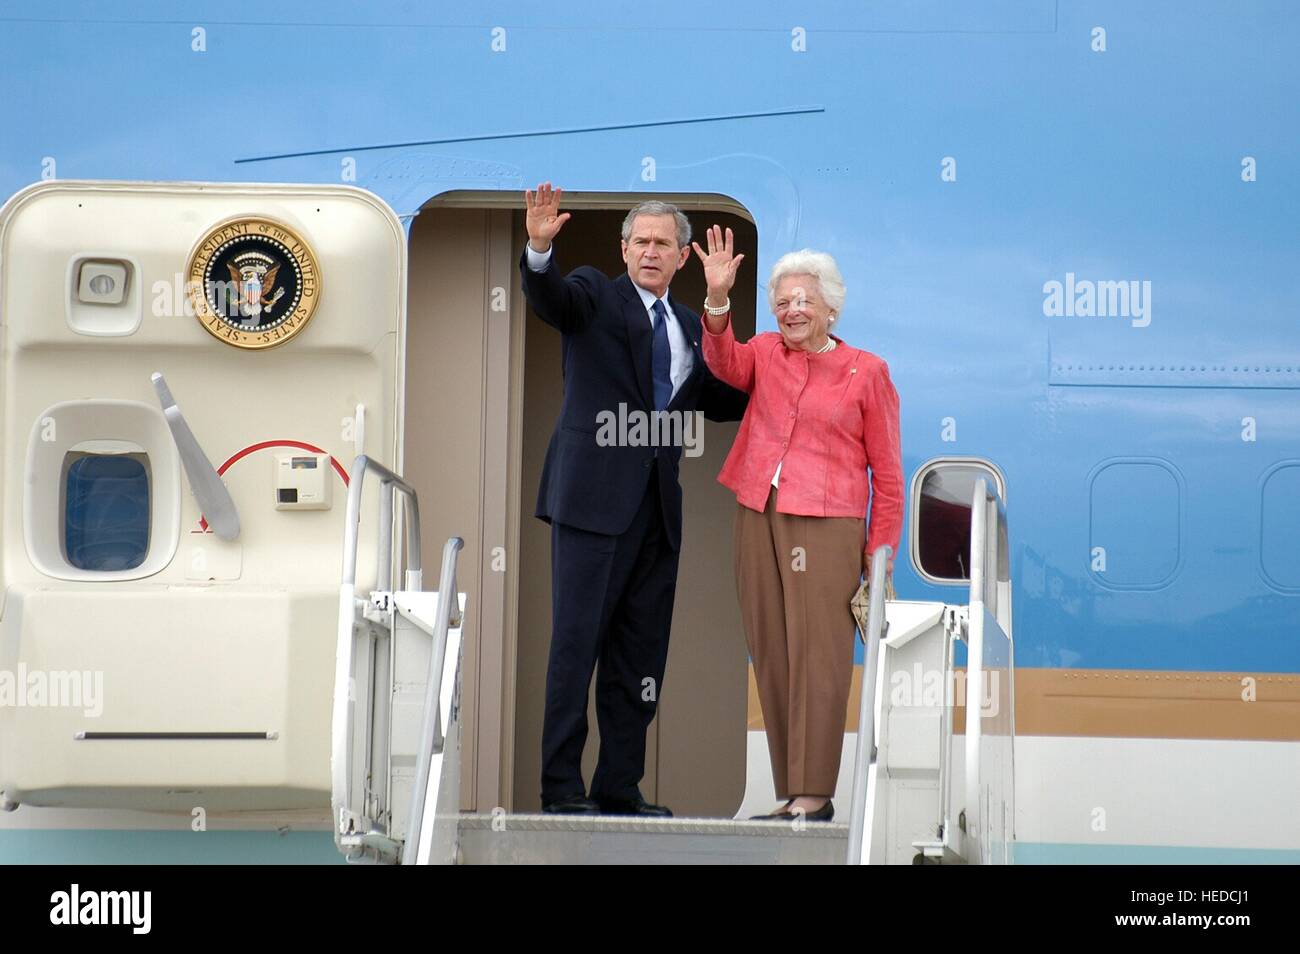 U.S. President George W. Bush and mother Barbara Bush wave goodbye to U.S. soldiers before boarding Air Force One at the Naval Air Station Pensacola March 18, 2005 in Pensacola, Florida. Stock Photo